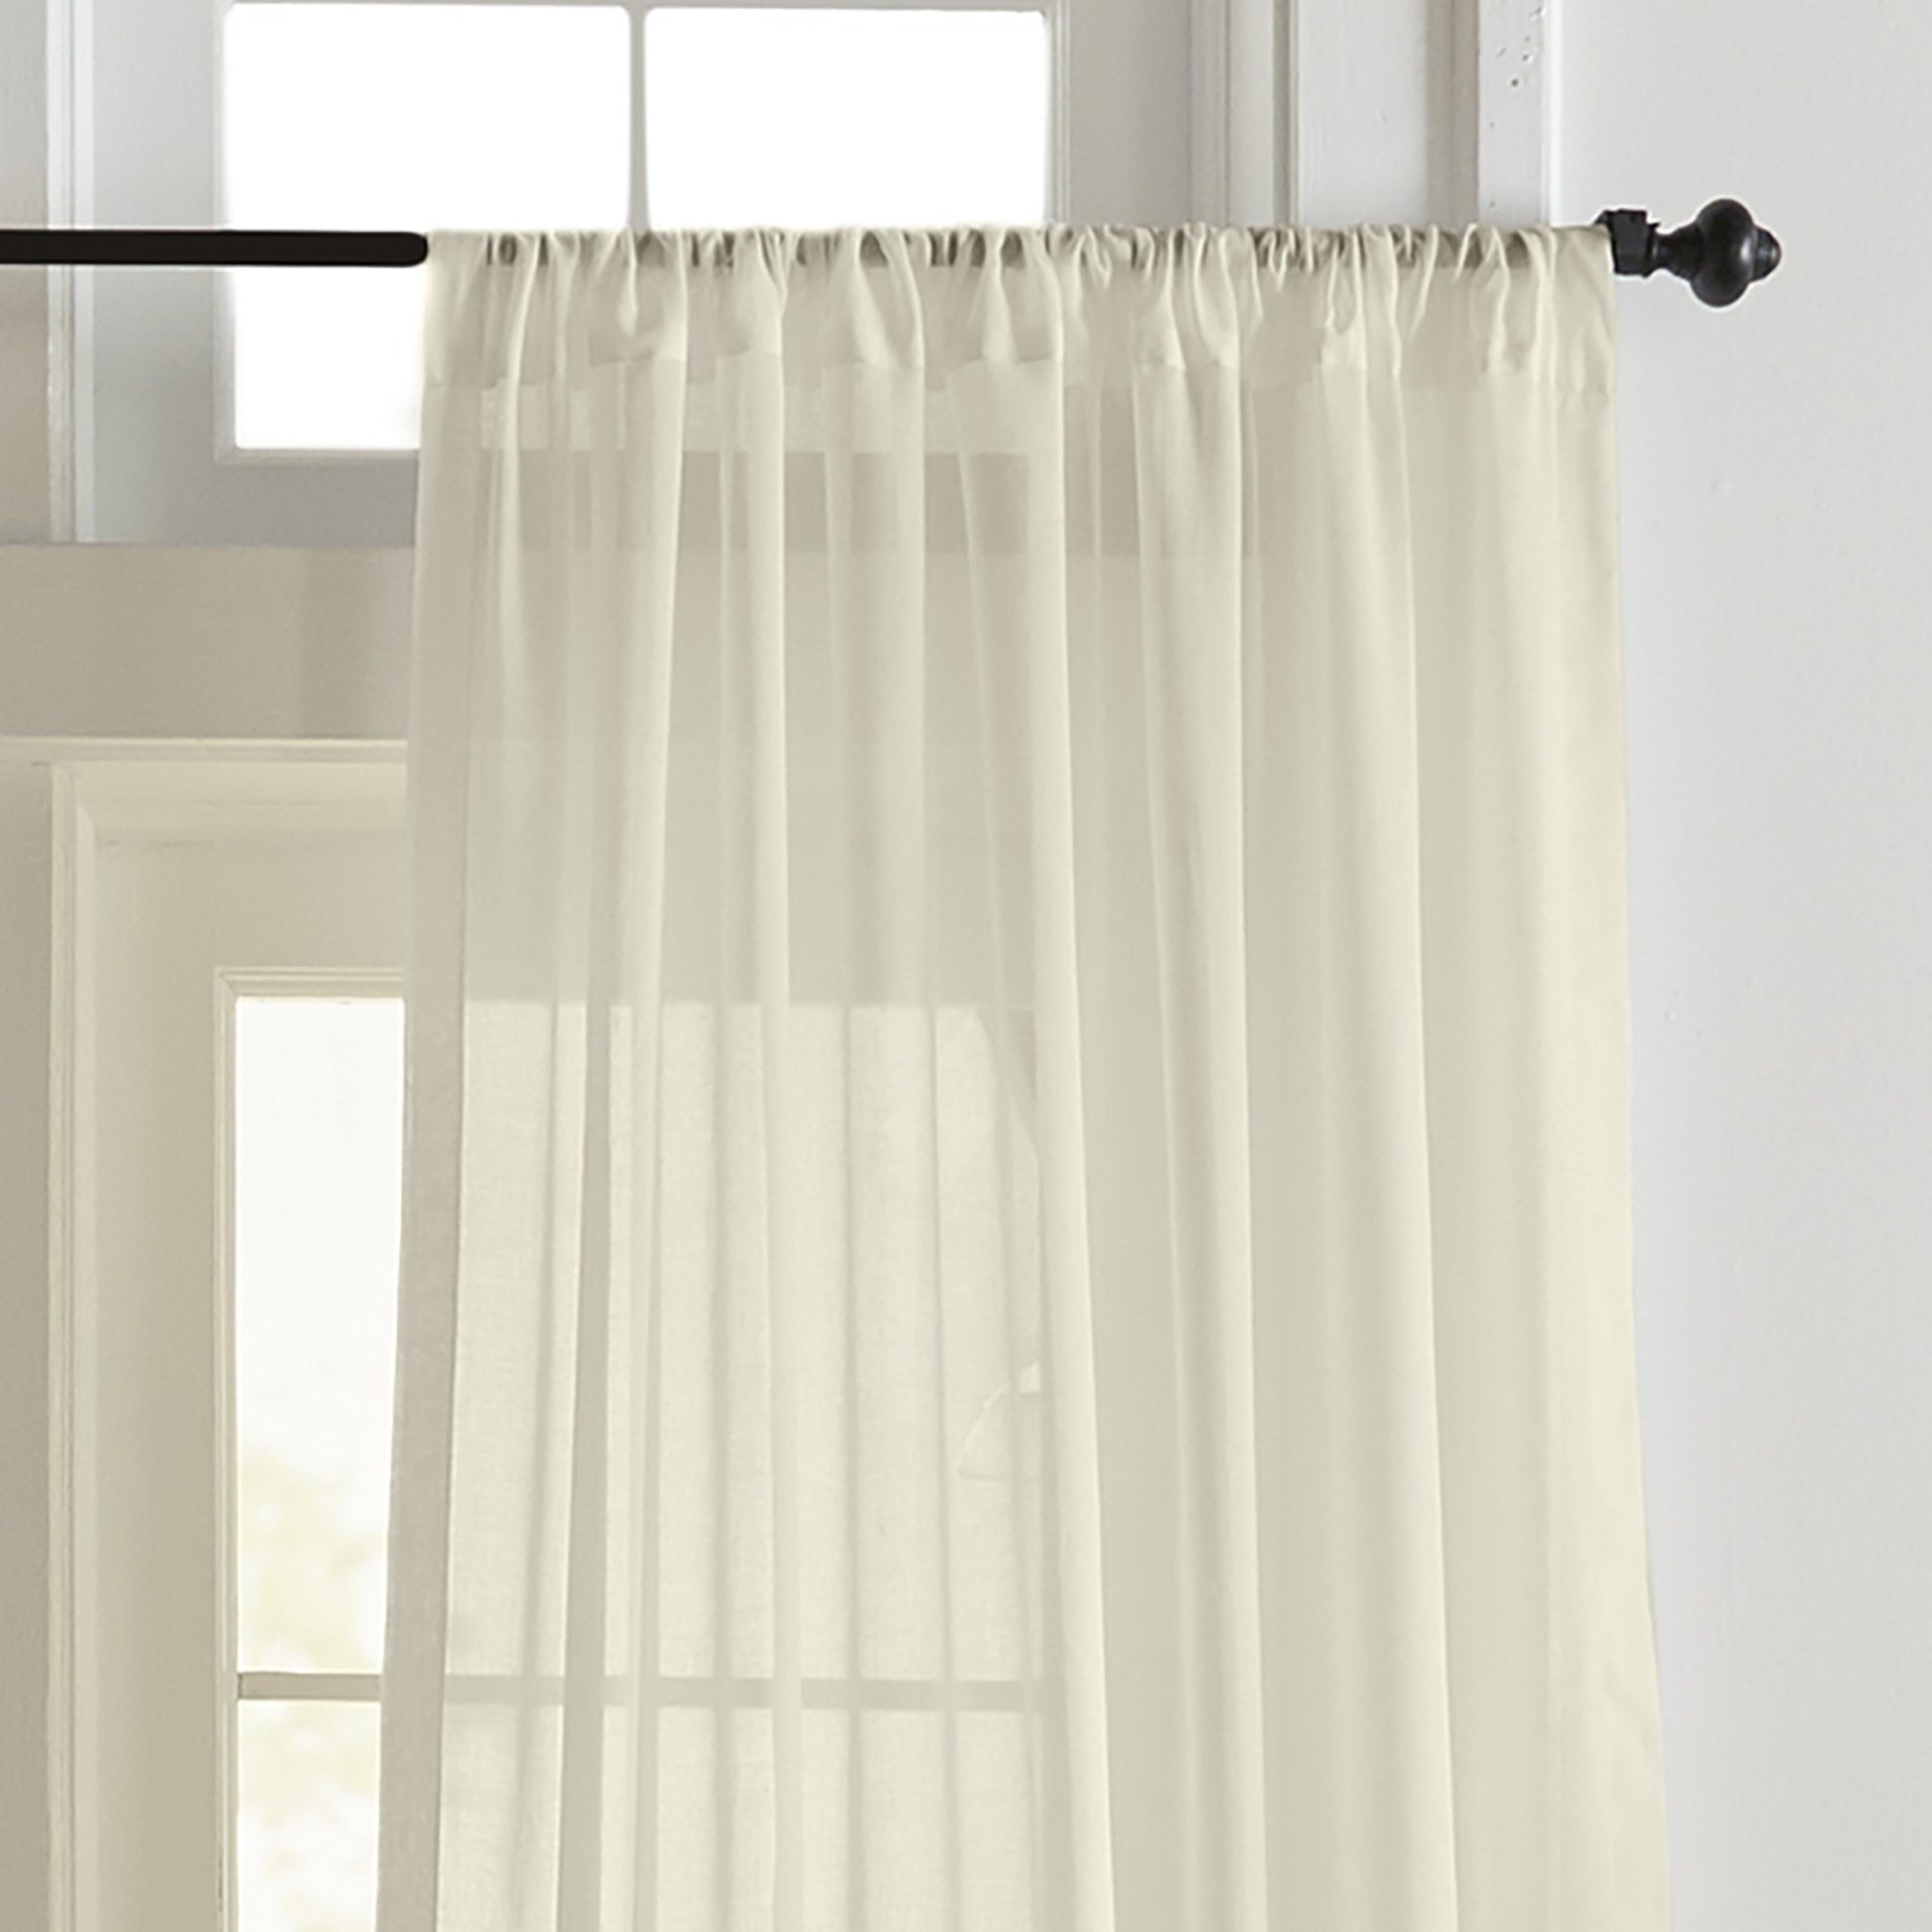 Asher Cotton Voile Sheer Window Curtain-Elrene Home Fashions